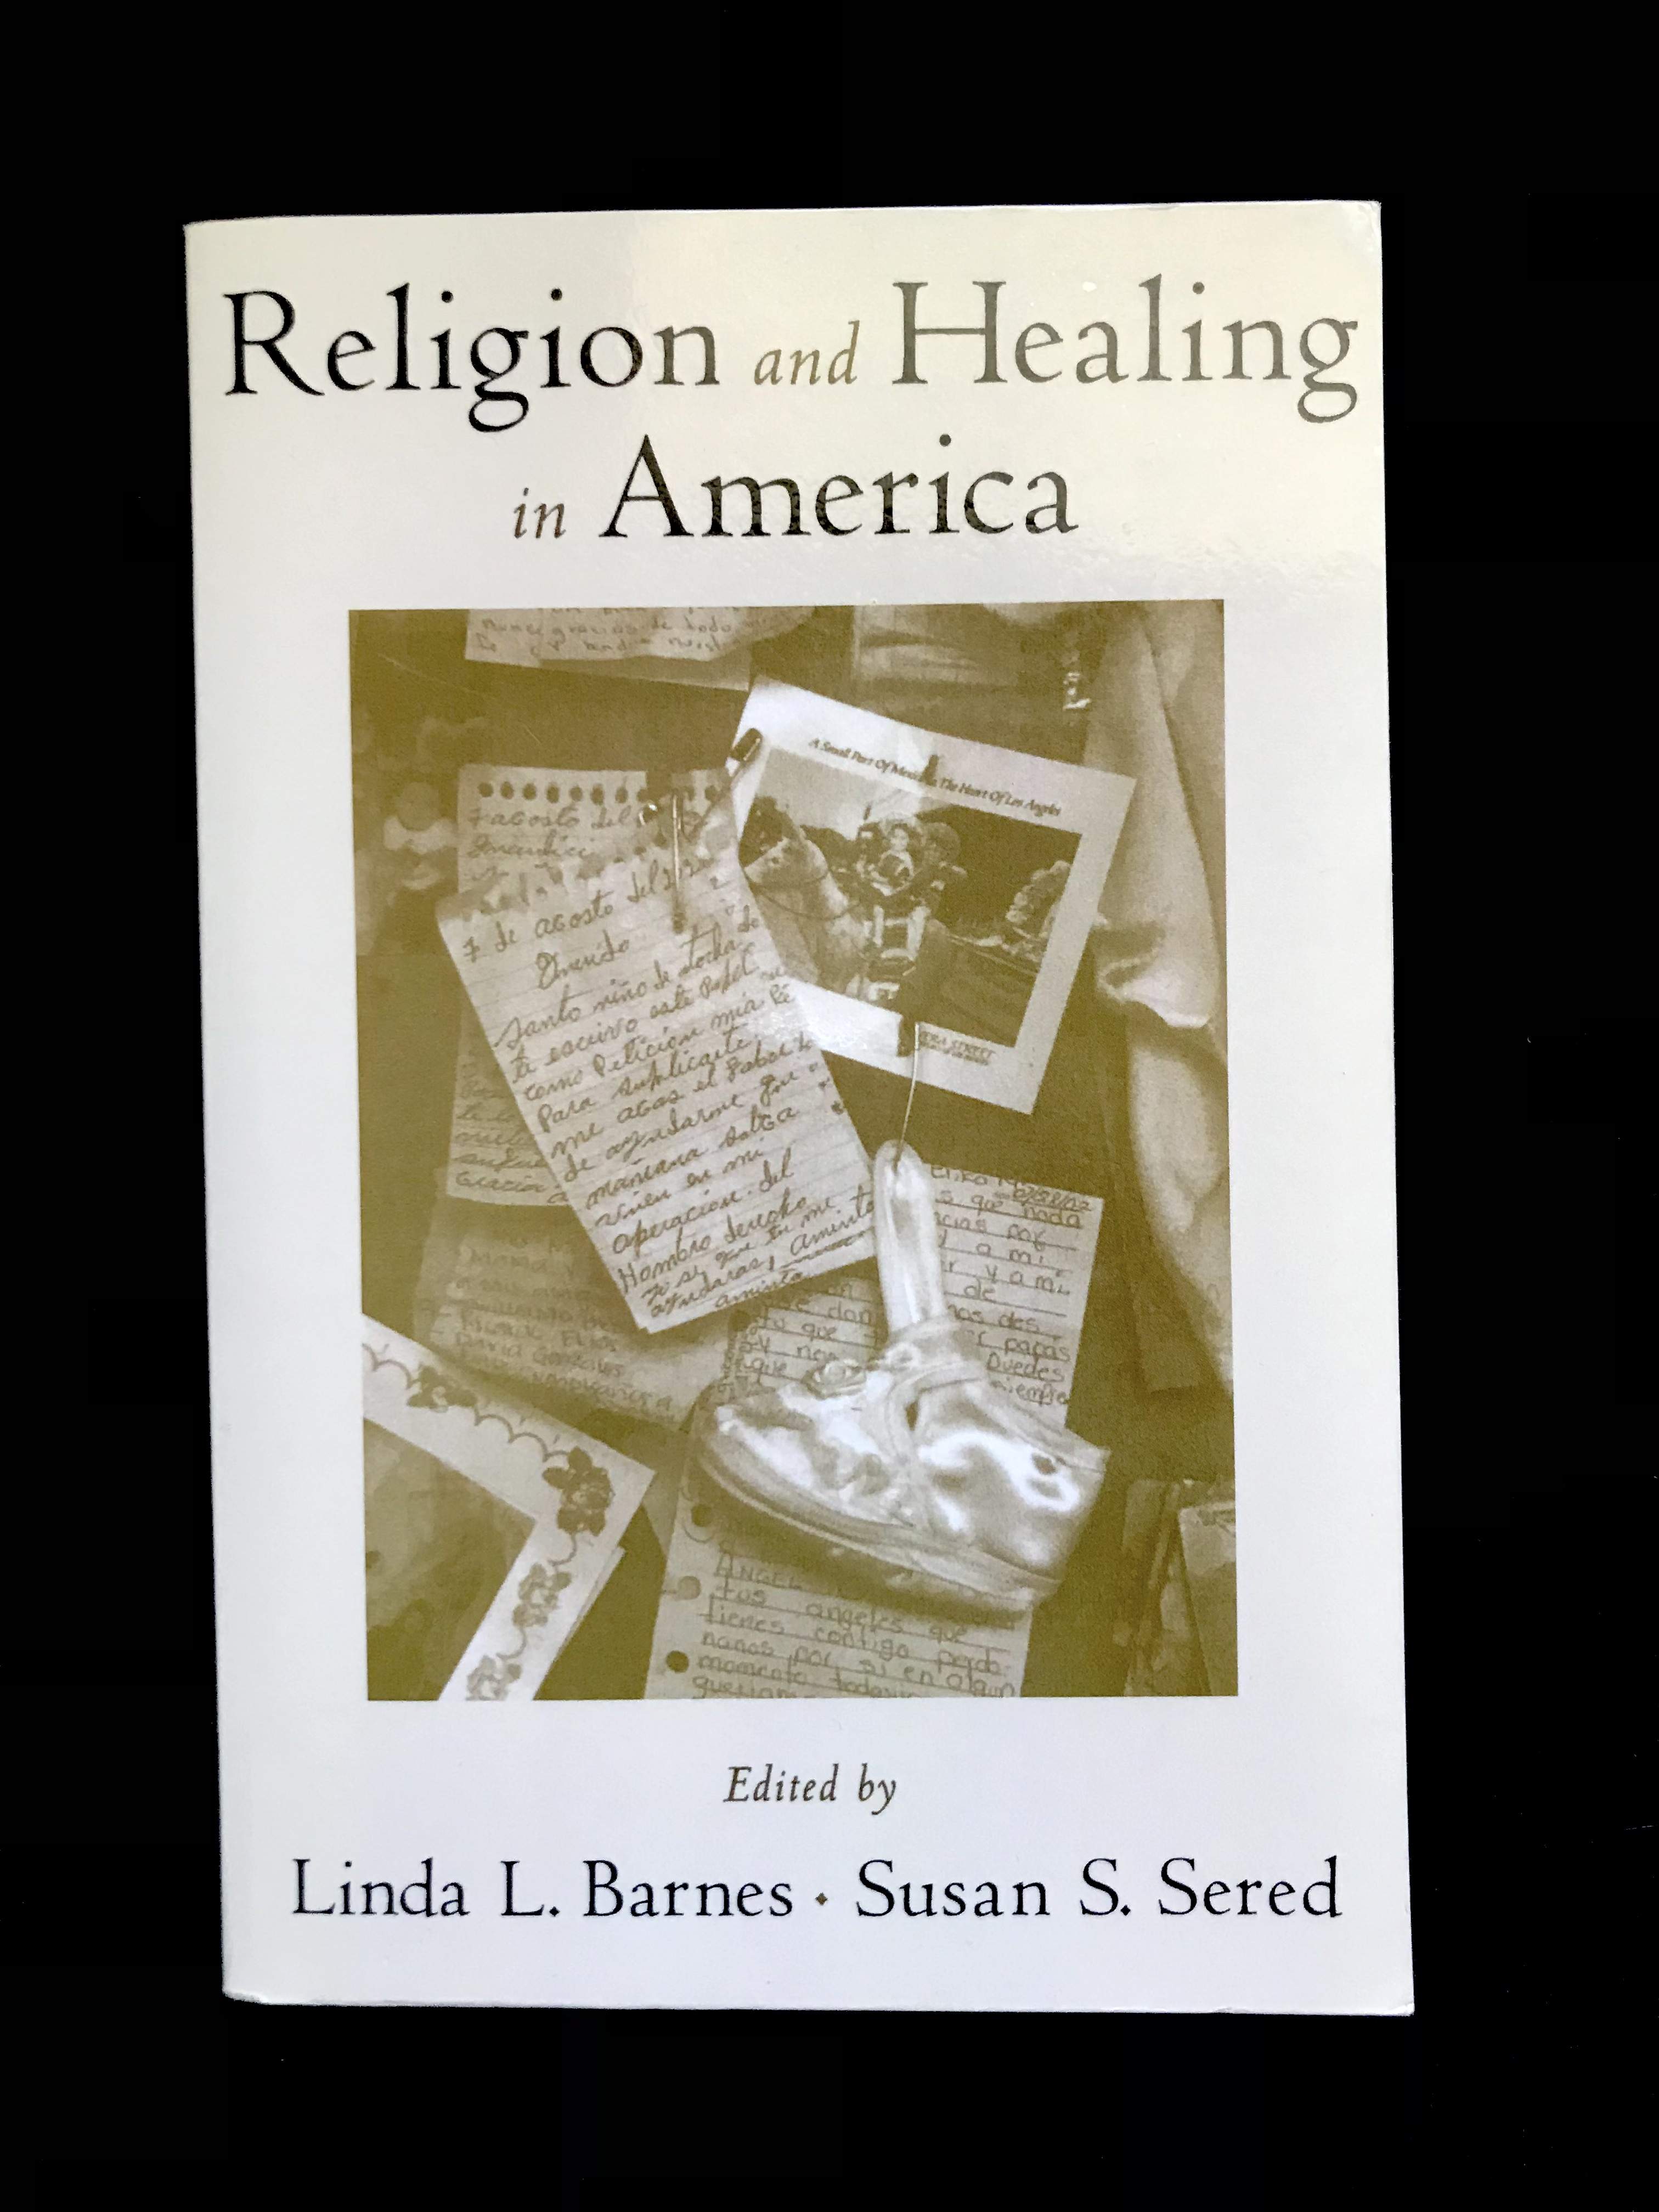 Religion And Healing In America edited by Linda L. Barnes & Susan S. Sered